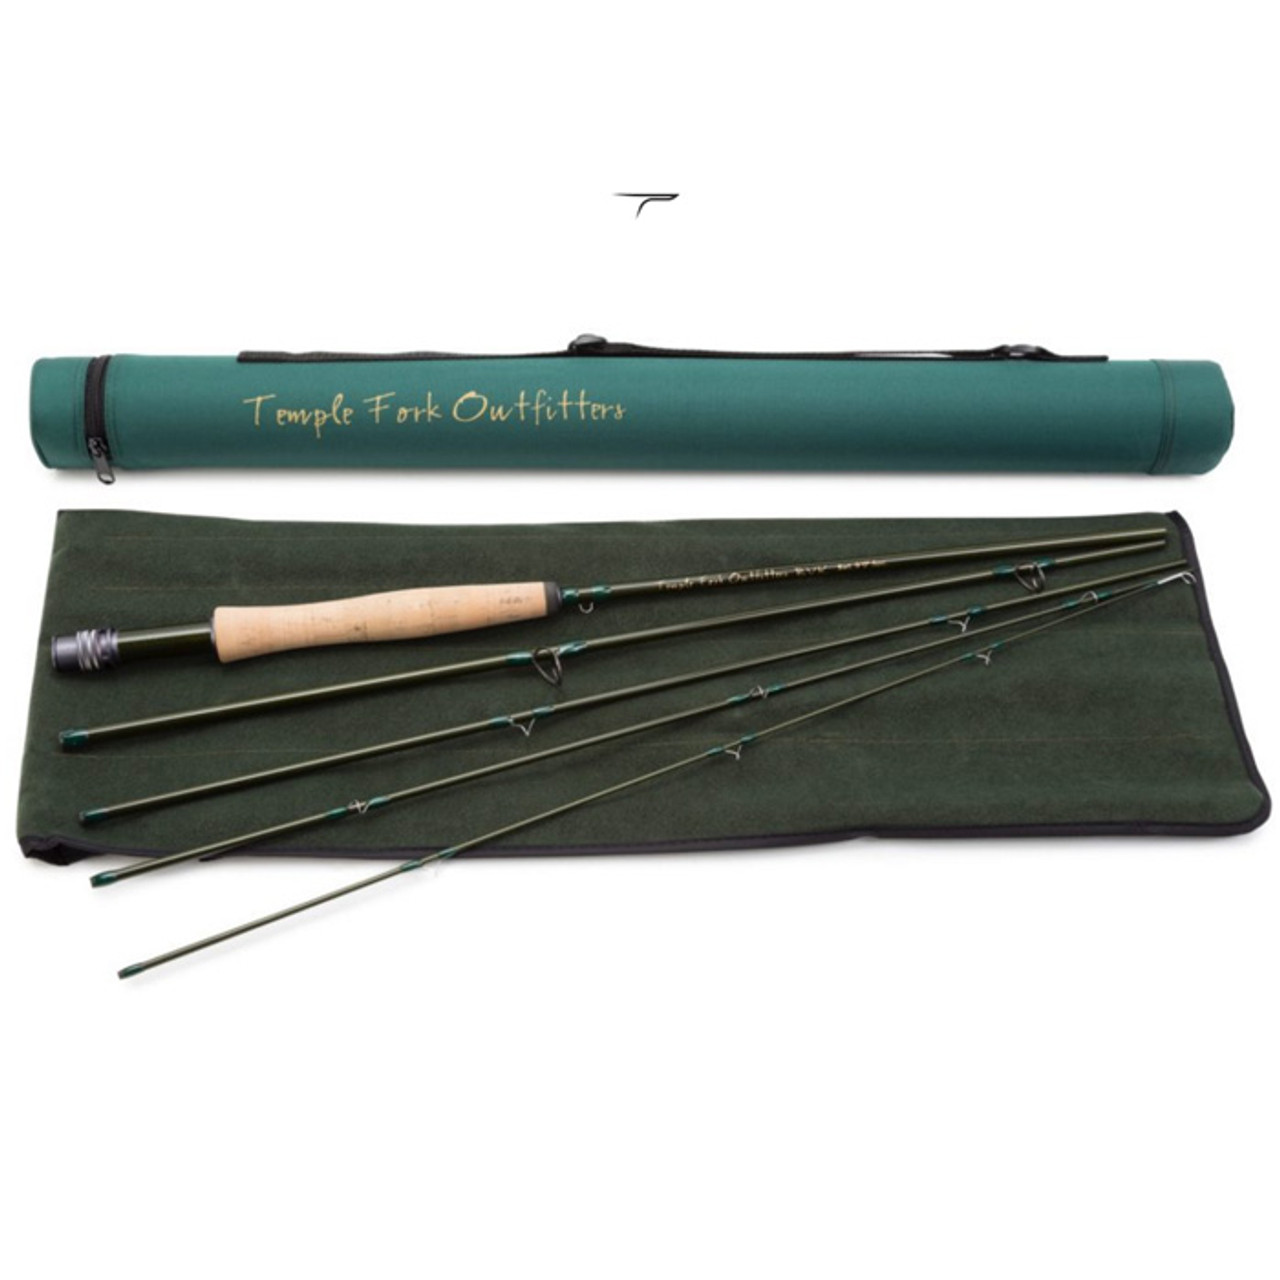 Temple Fork Outfitters (TFO) TFO BVK Series TF 08 90 4pc Fly Rod